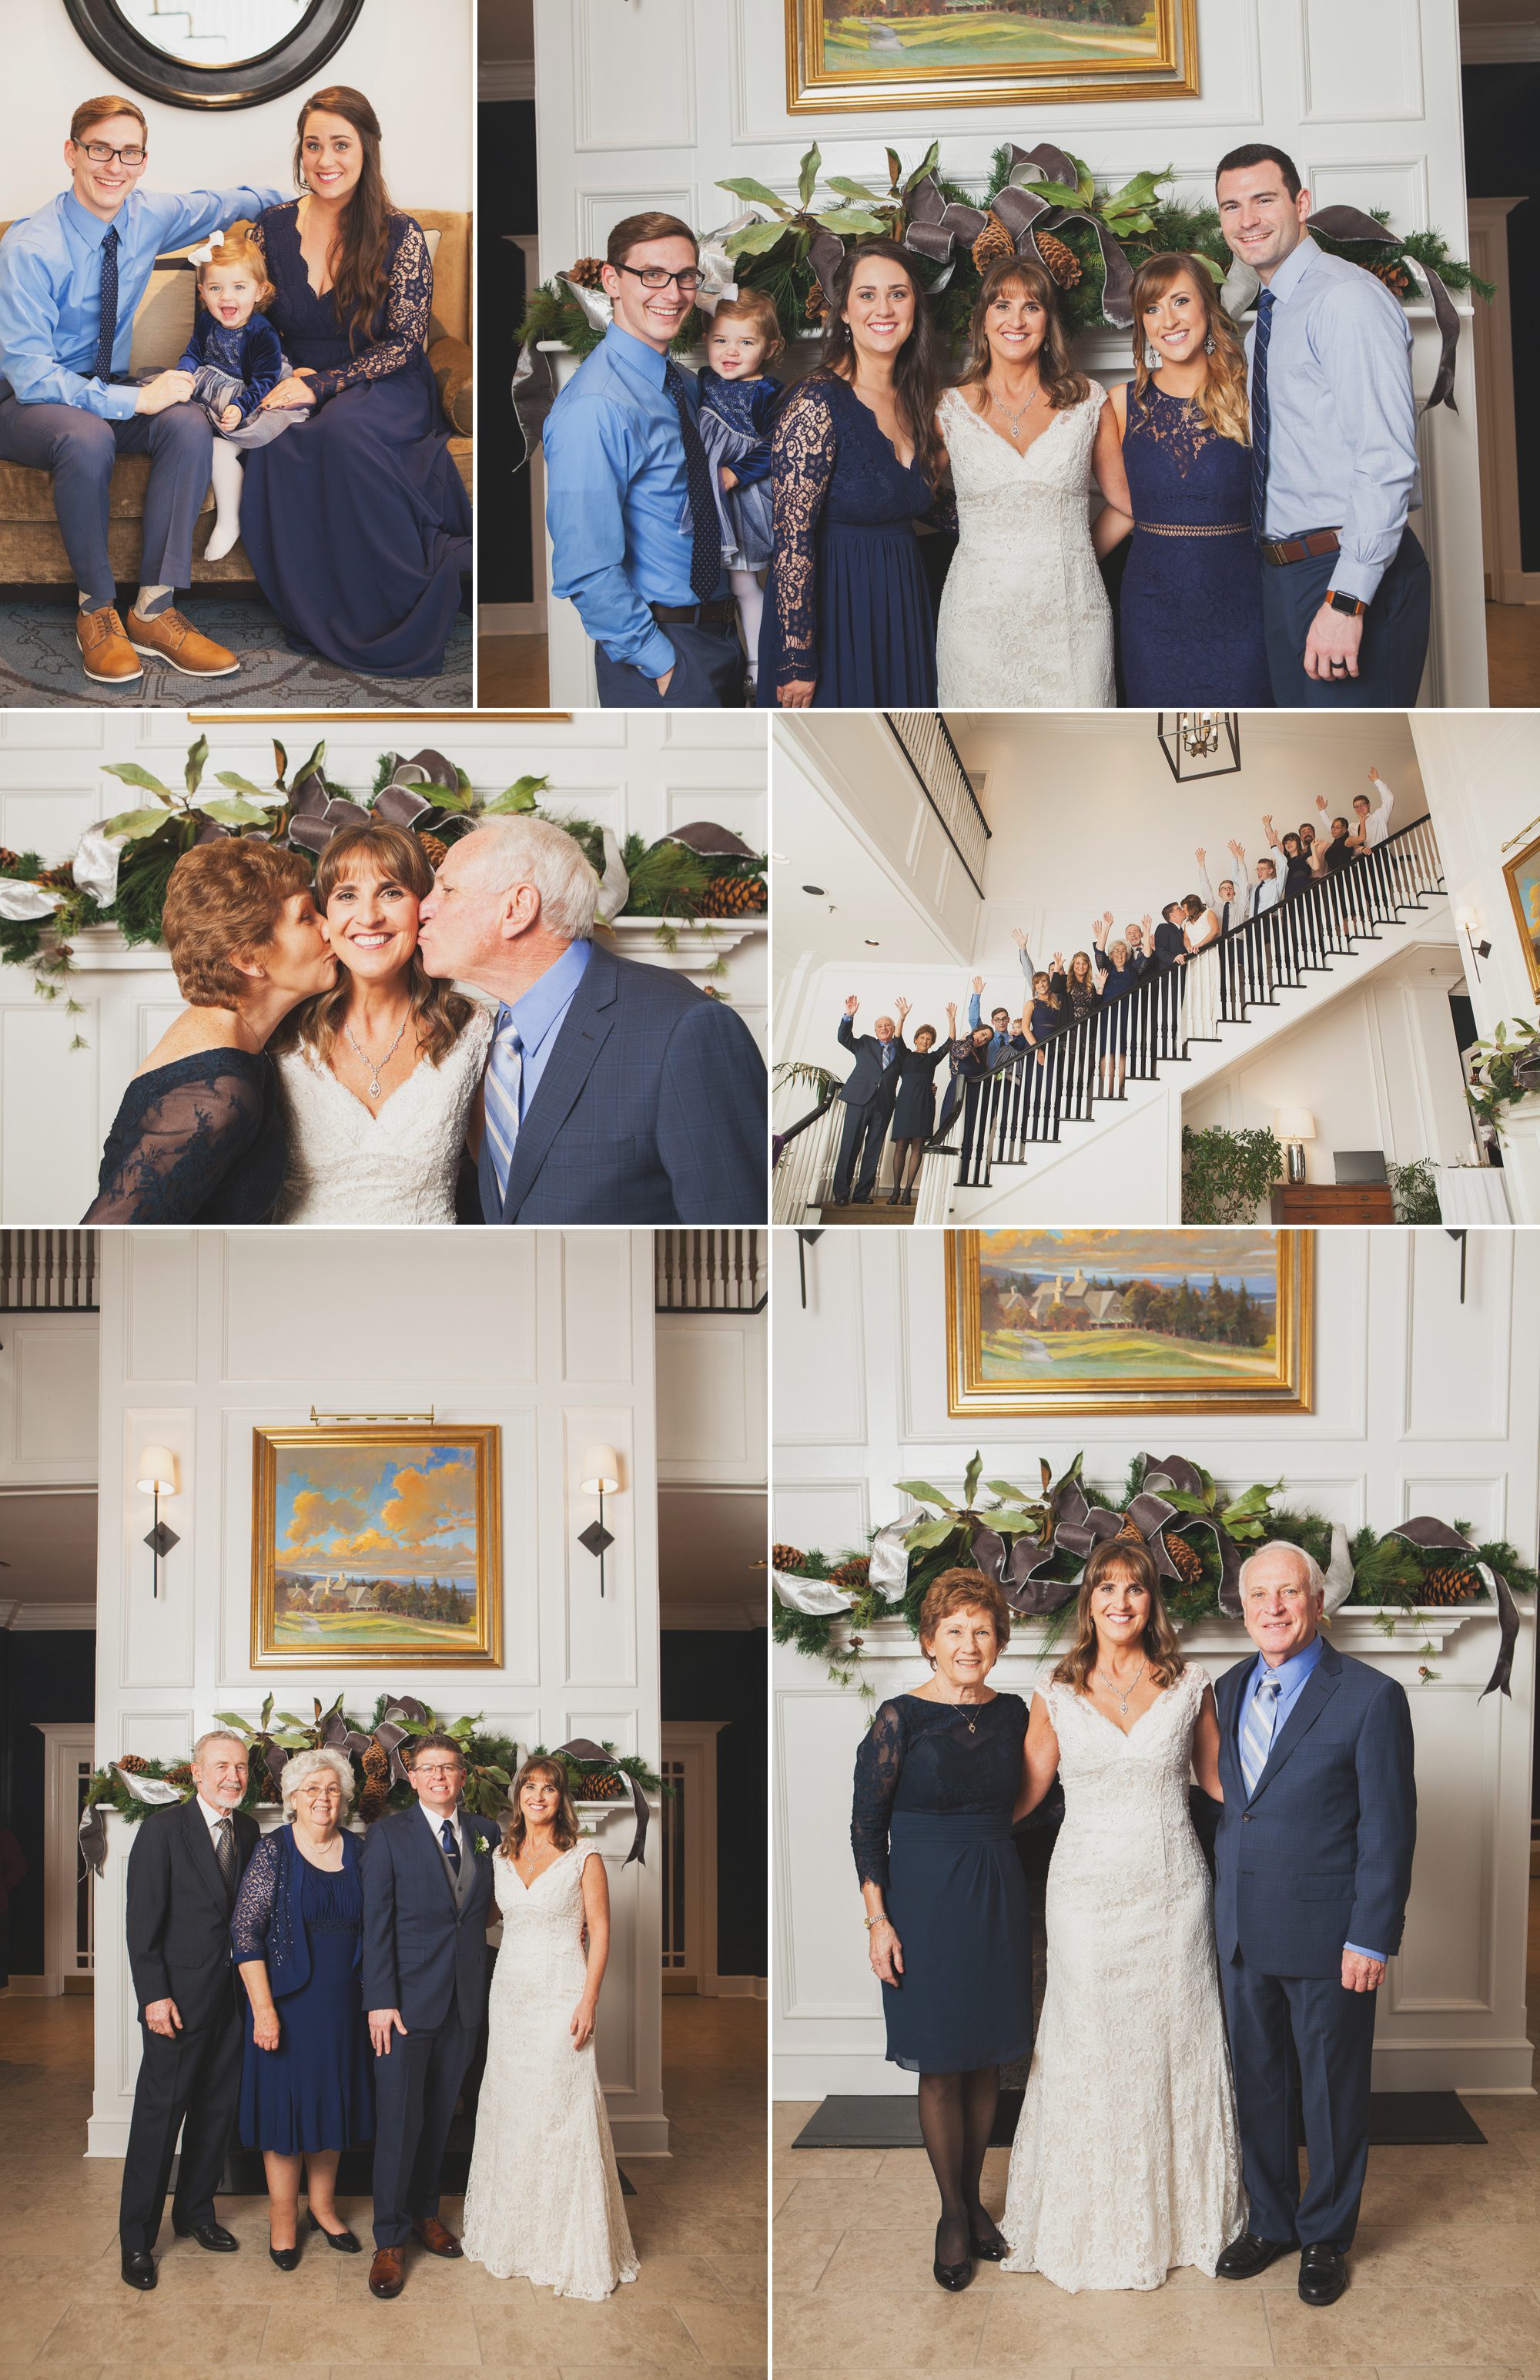 Formal family photos before wedding in clubhouse. Winter wedding at Vanderbilt Legends Golf Course in Brentwood TN, photos by Krista Lee Photography